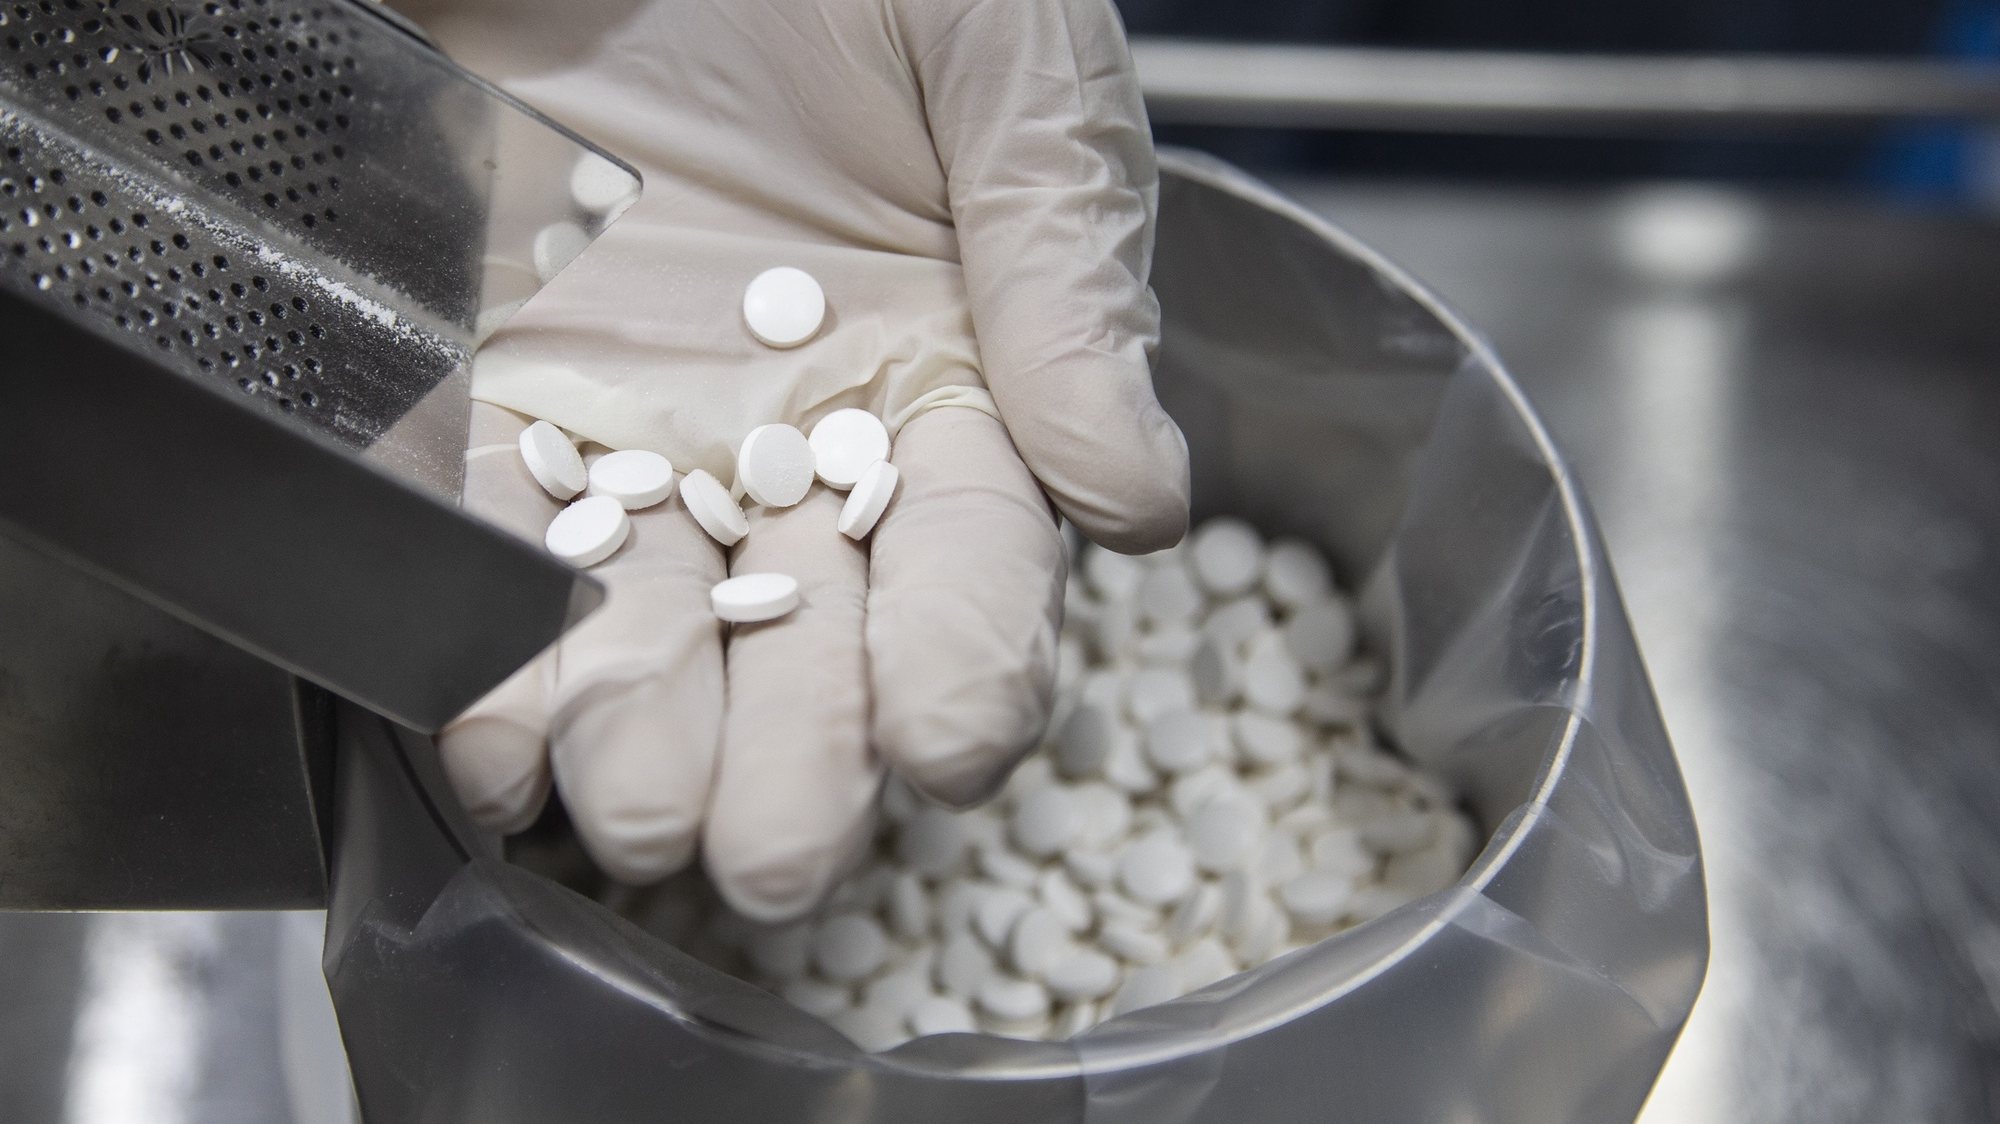 epa08508733 An employee holds tablets of the antiviral medication favipiravir at the laboratories of the Eva Pharma company in Cairo, Egypt, 25 June 2020. Favipiravir appears to have been proven effective in treating COVID-19 patients in Russia, while ongoing trials of the drug are taking place in Japan and other countries. In addition, the Egyptian drugmaker has reached a landmark deal with US company Gilead Sciences Inc. licensing the former to manufacture Gilead&#039;s antiviral drug remdesivir – another experimental treatment for patients suffering from the pandemic COVID-19 disease caused by the SARS-CoV-2 coronavirus – and distribute it in 127 countries.  EPA/MOHAMED HOSSAM